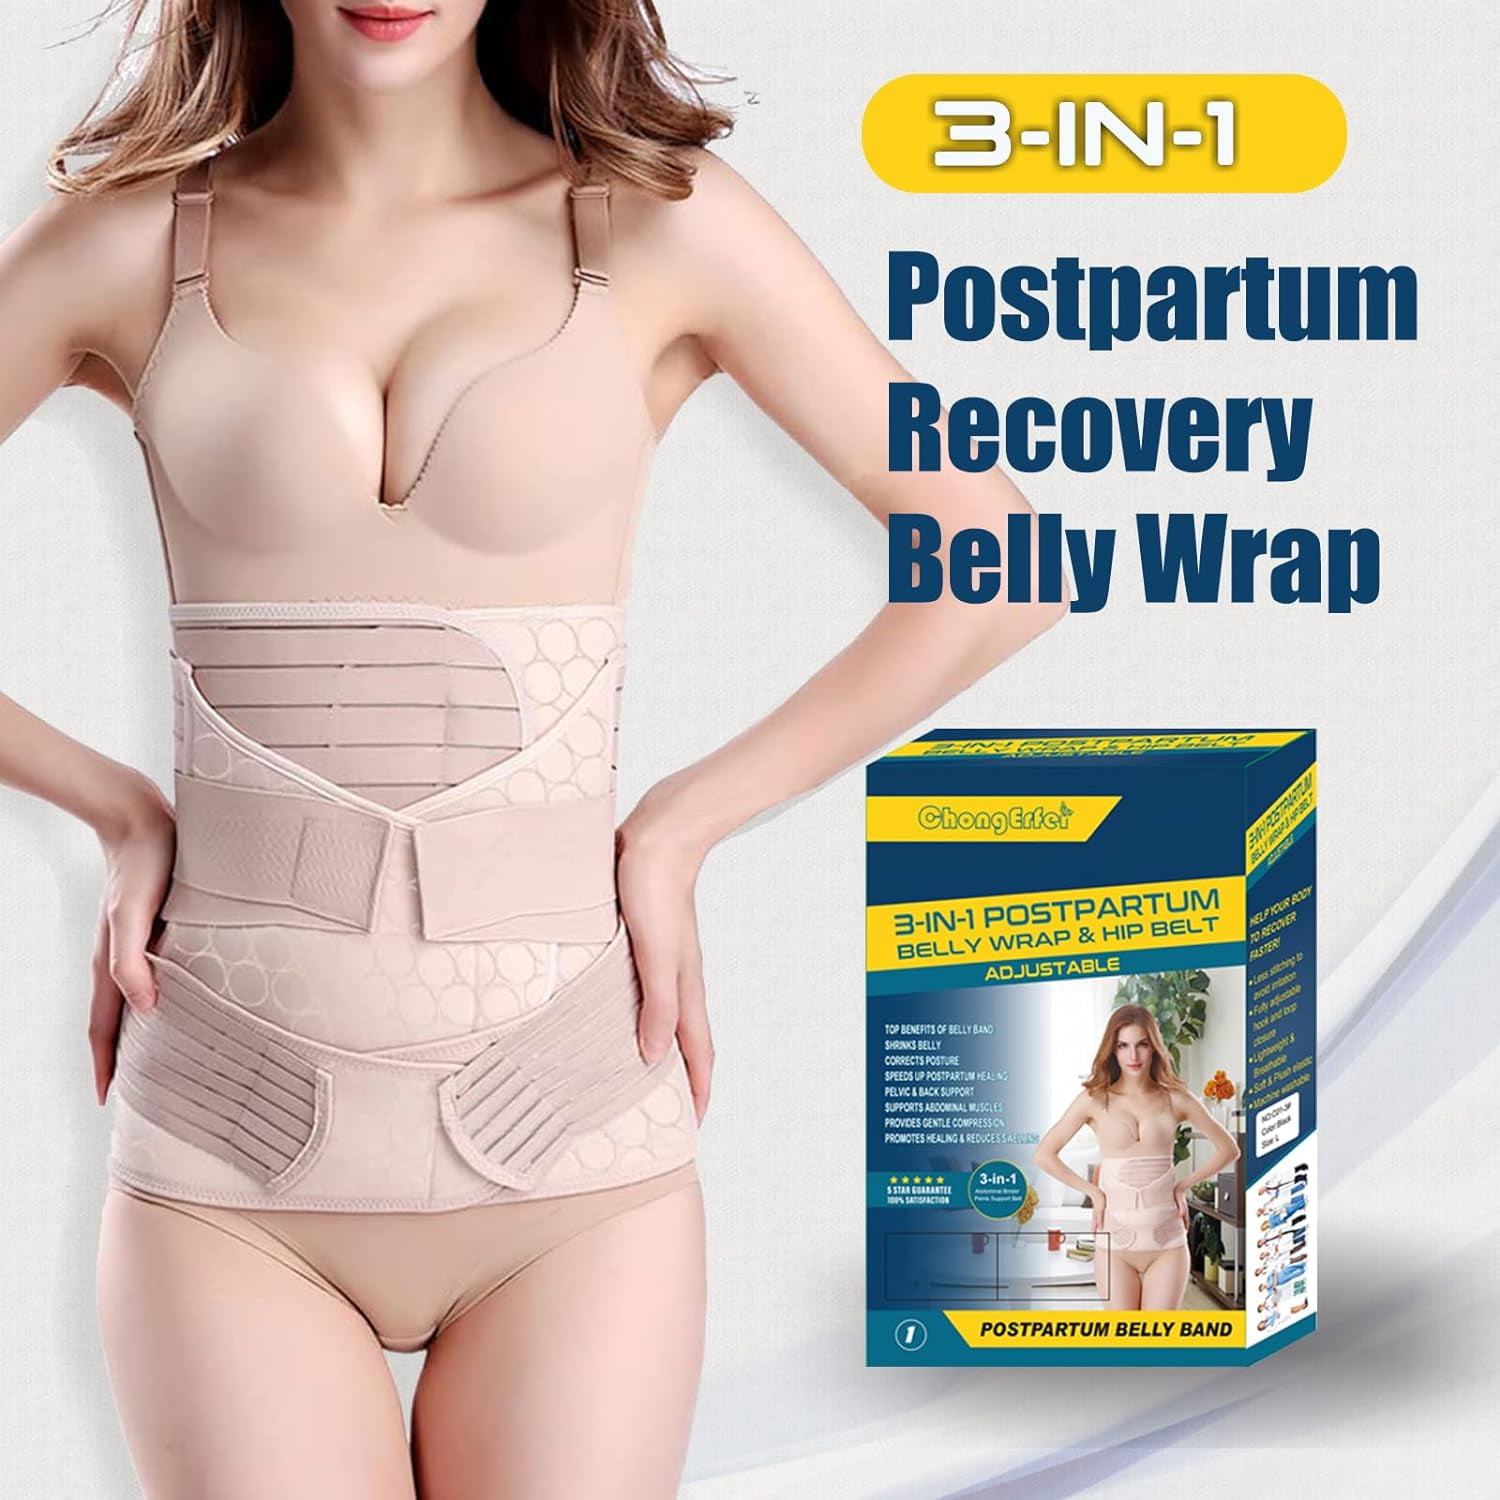 The benefits of postpartum belly wrapping